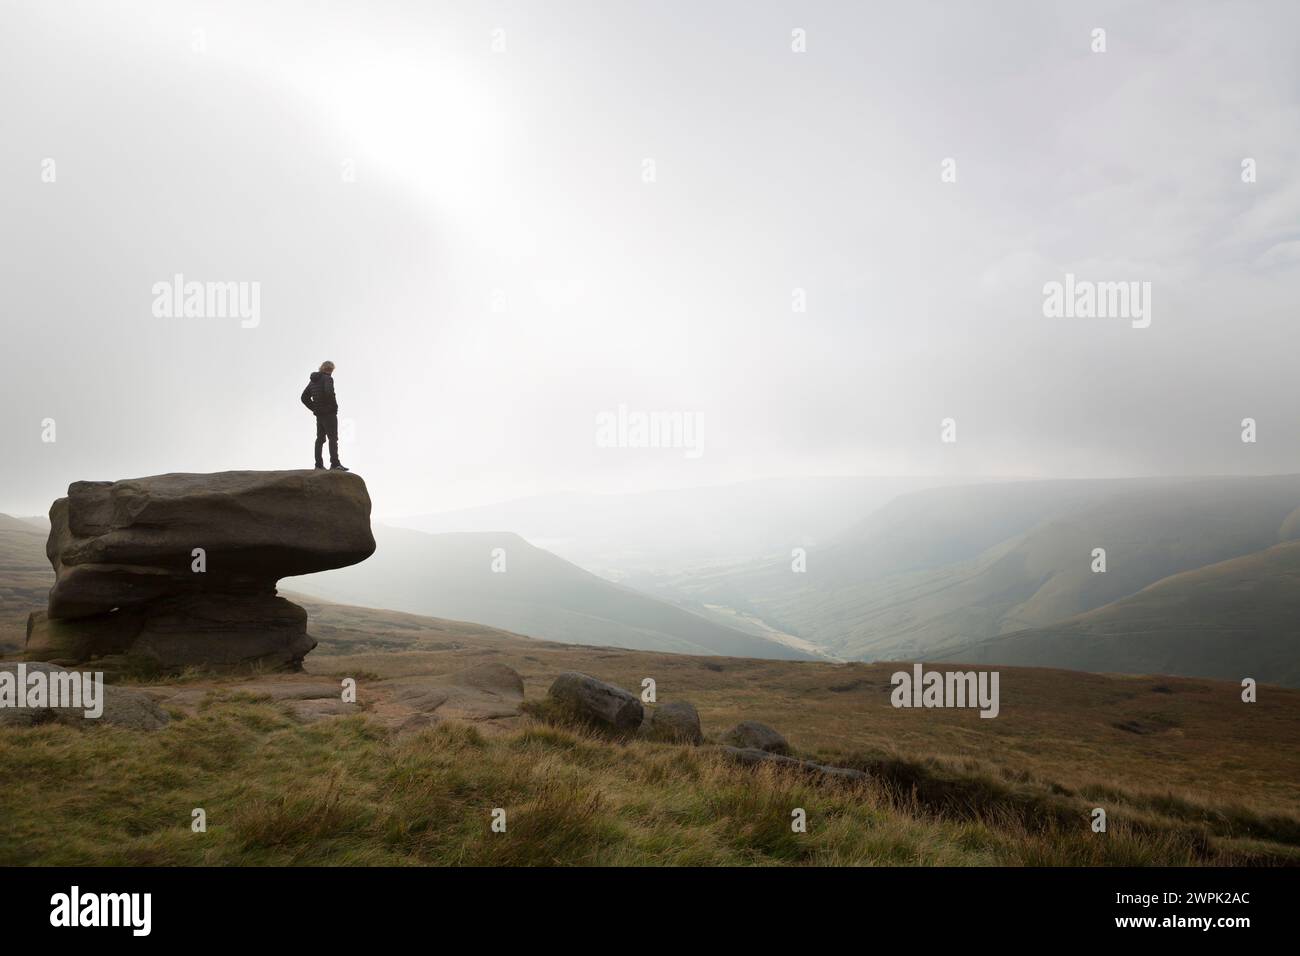 UK, West Yorkshire, view along Kinder Scout skyline with figure on balanced rock. Stock Photo